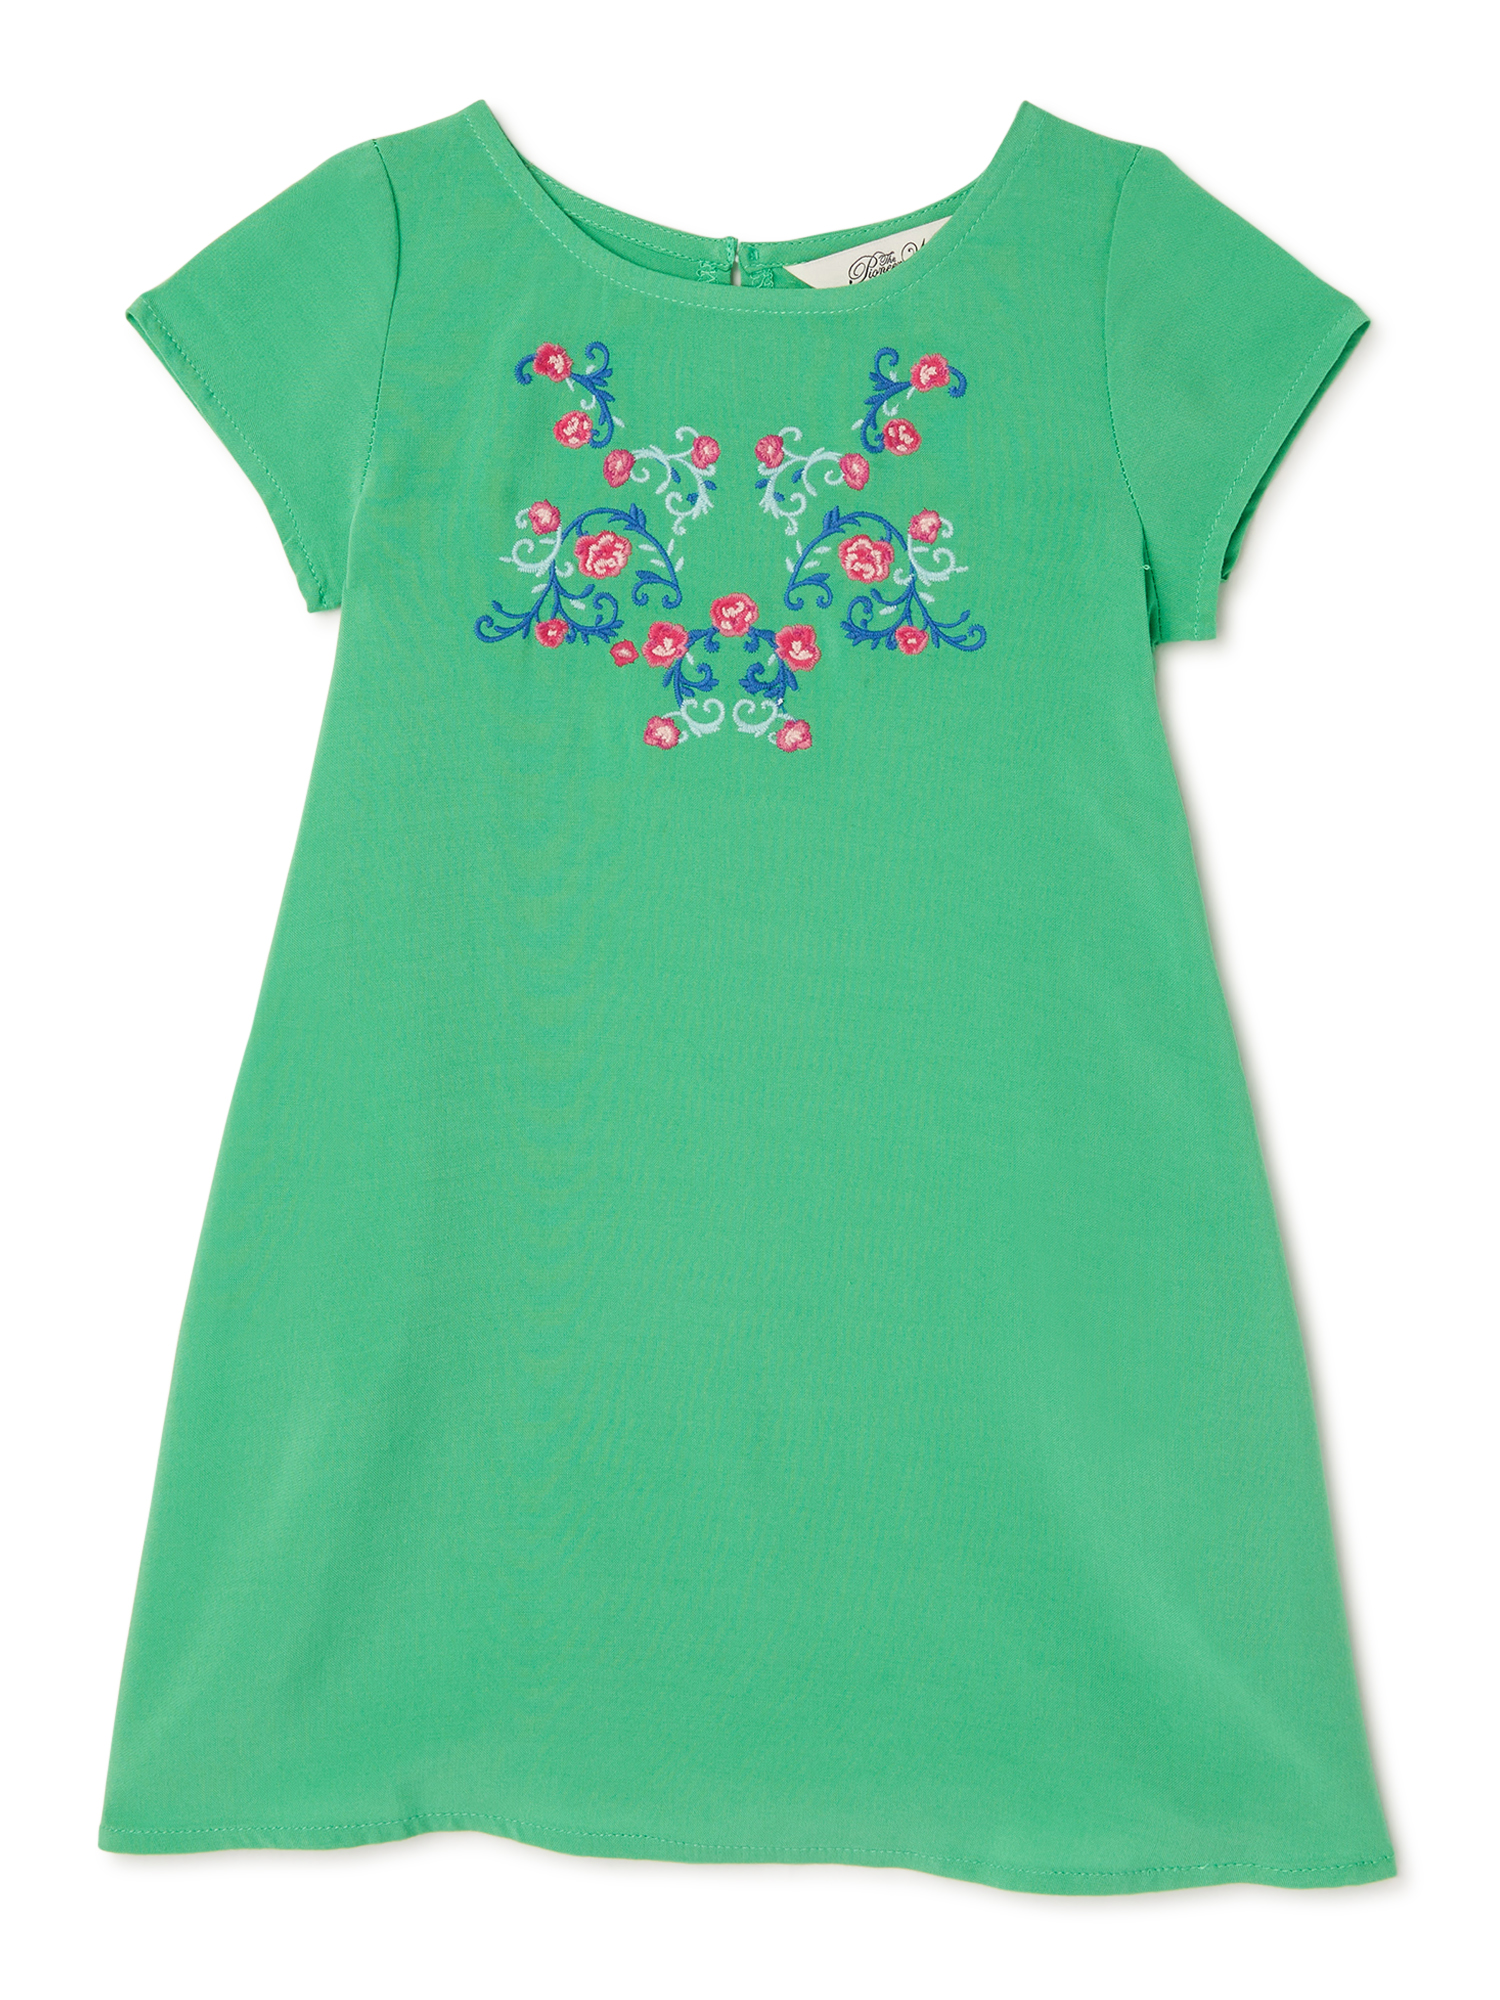 The Pioneer Woman Mommy & Me Toddler Girls Embroidered Dress, Sizes 2T-6X - image 1 of 4